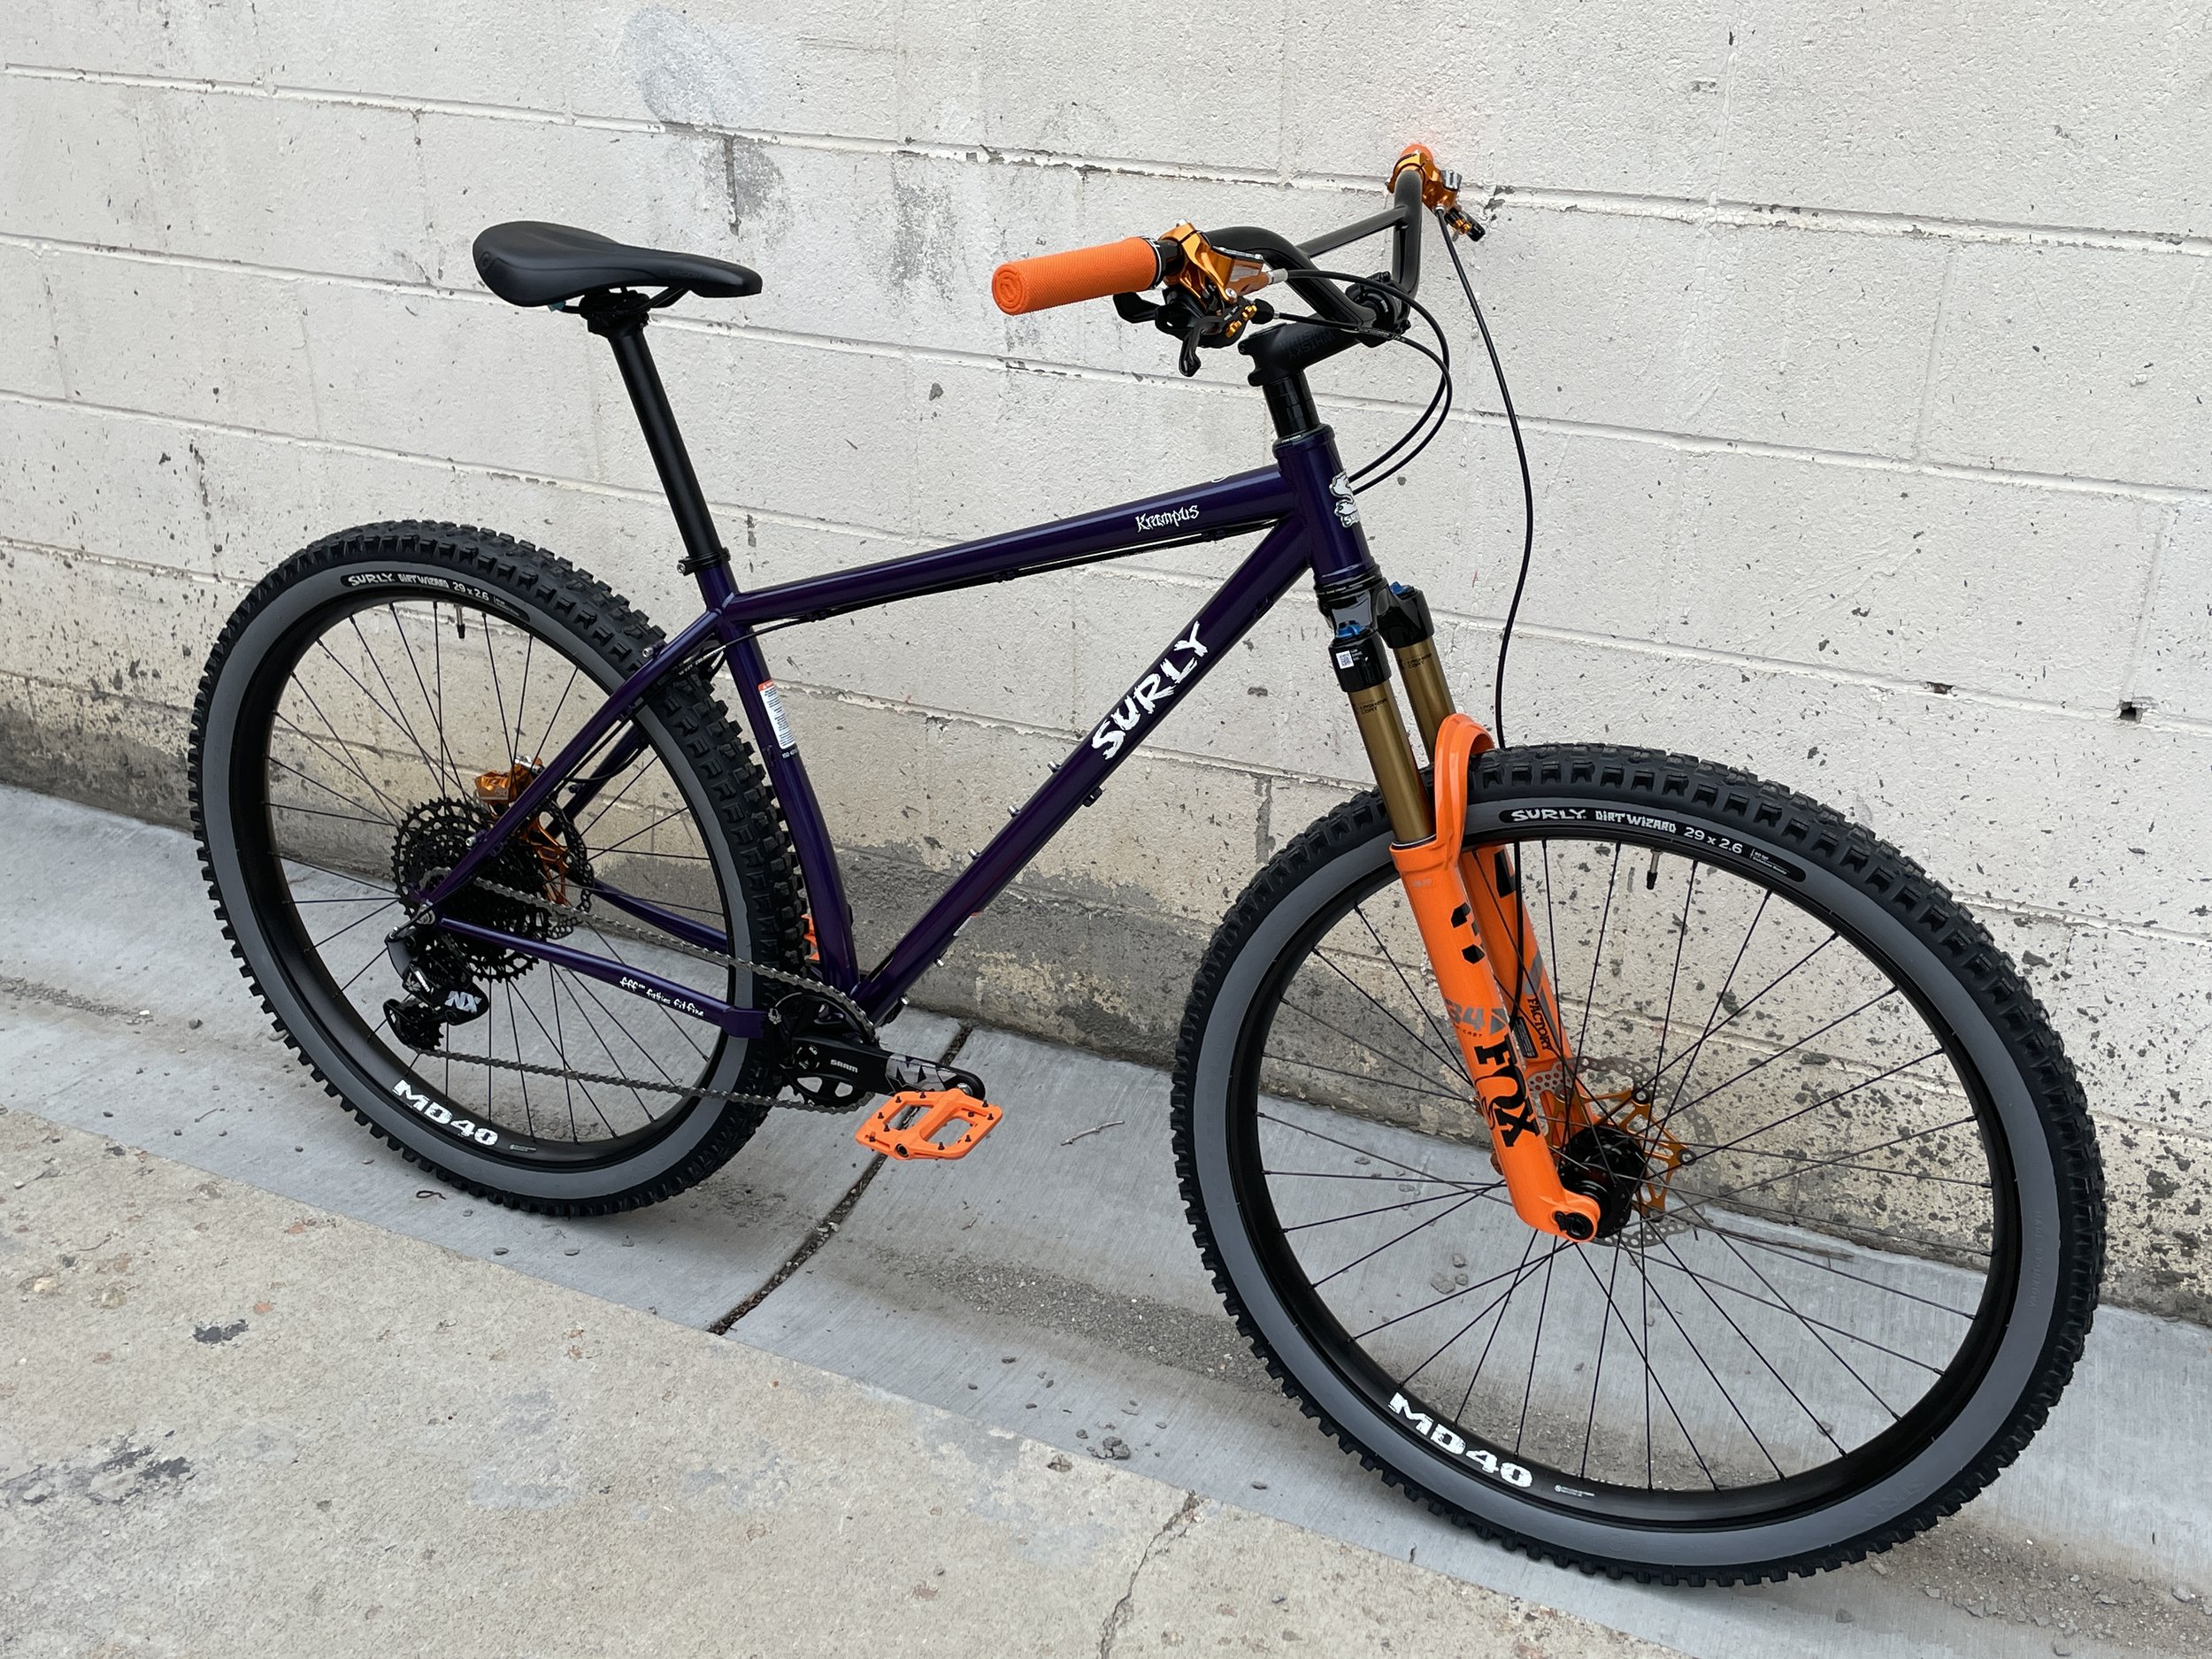 CUSTOM SURLY BUILDS — Wheat Ridge CO Bicycle Repair, Surly and Salsa Dealer Yawp Cyclery